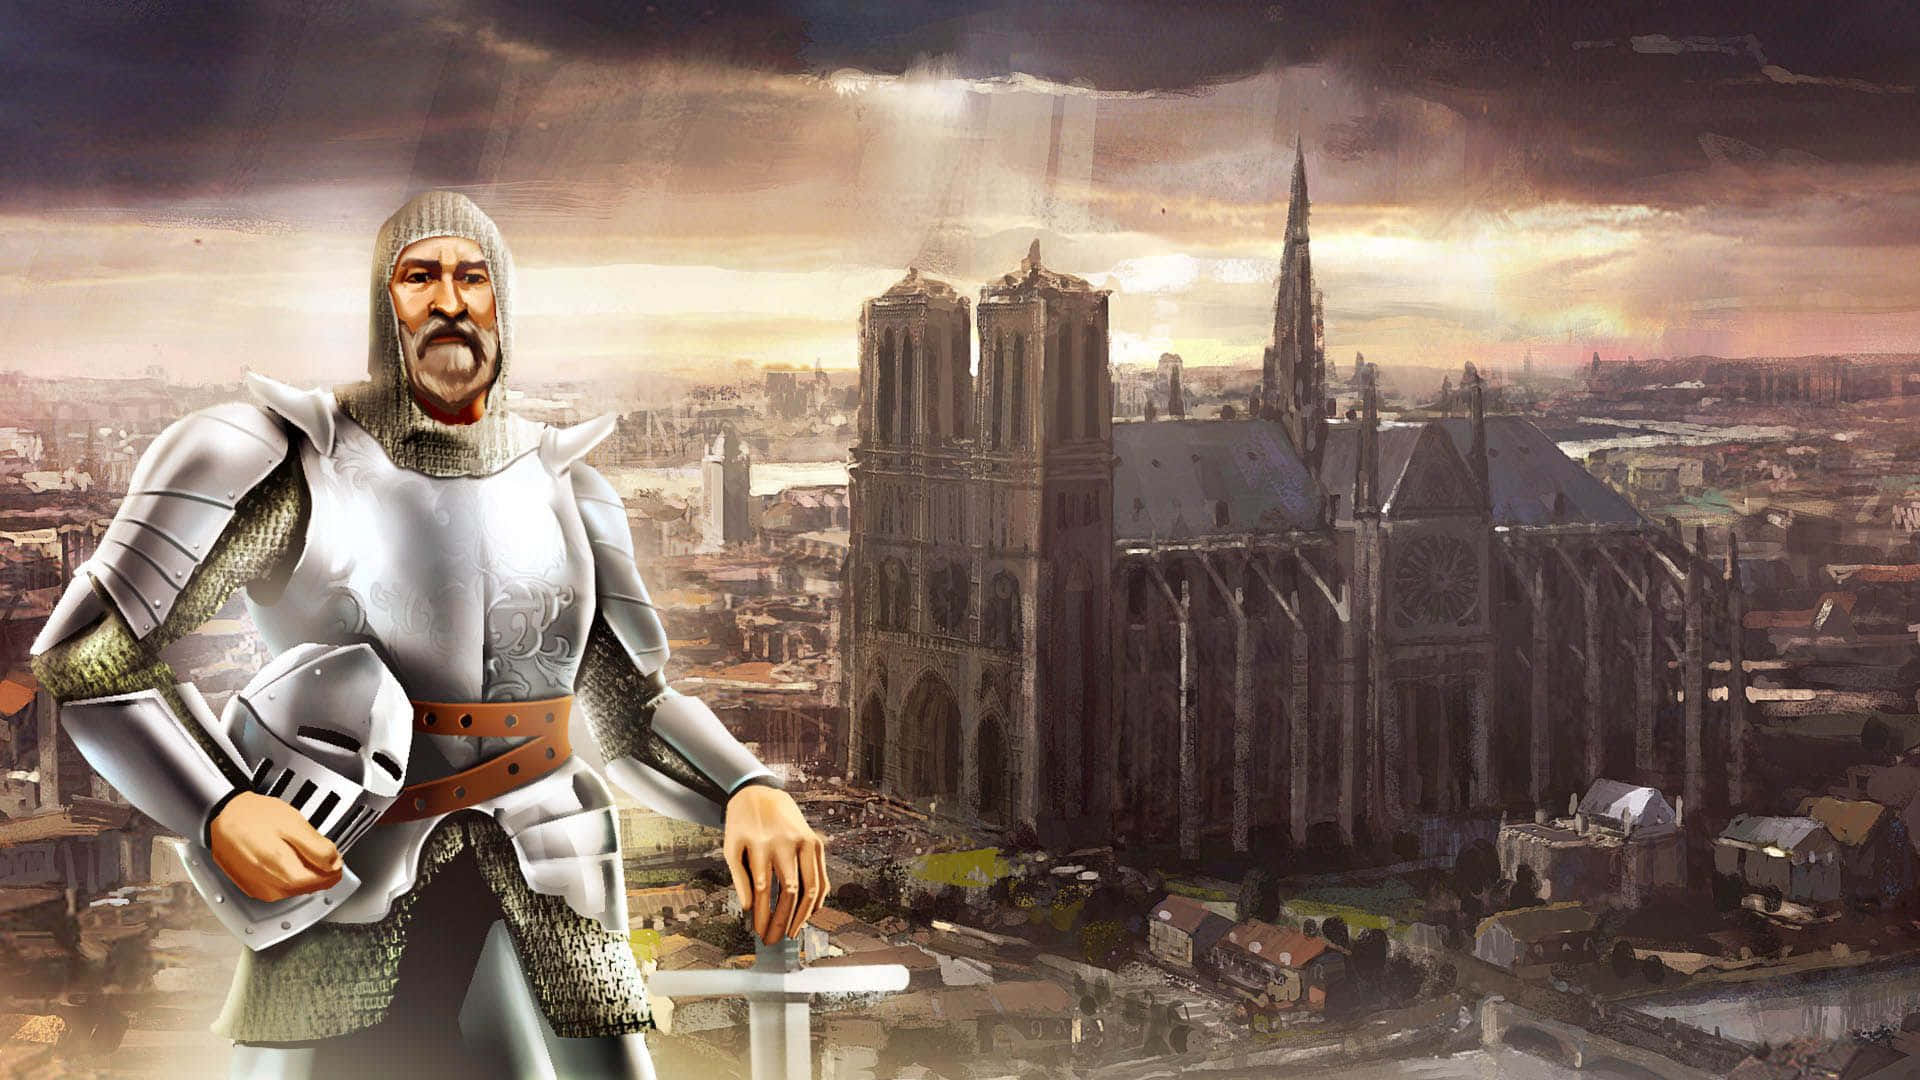 A Man In Armor Standing In Front Of A City